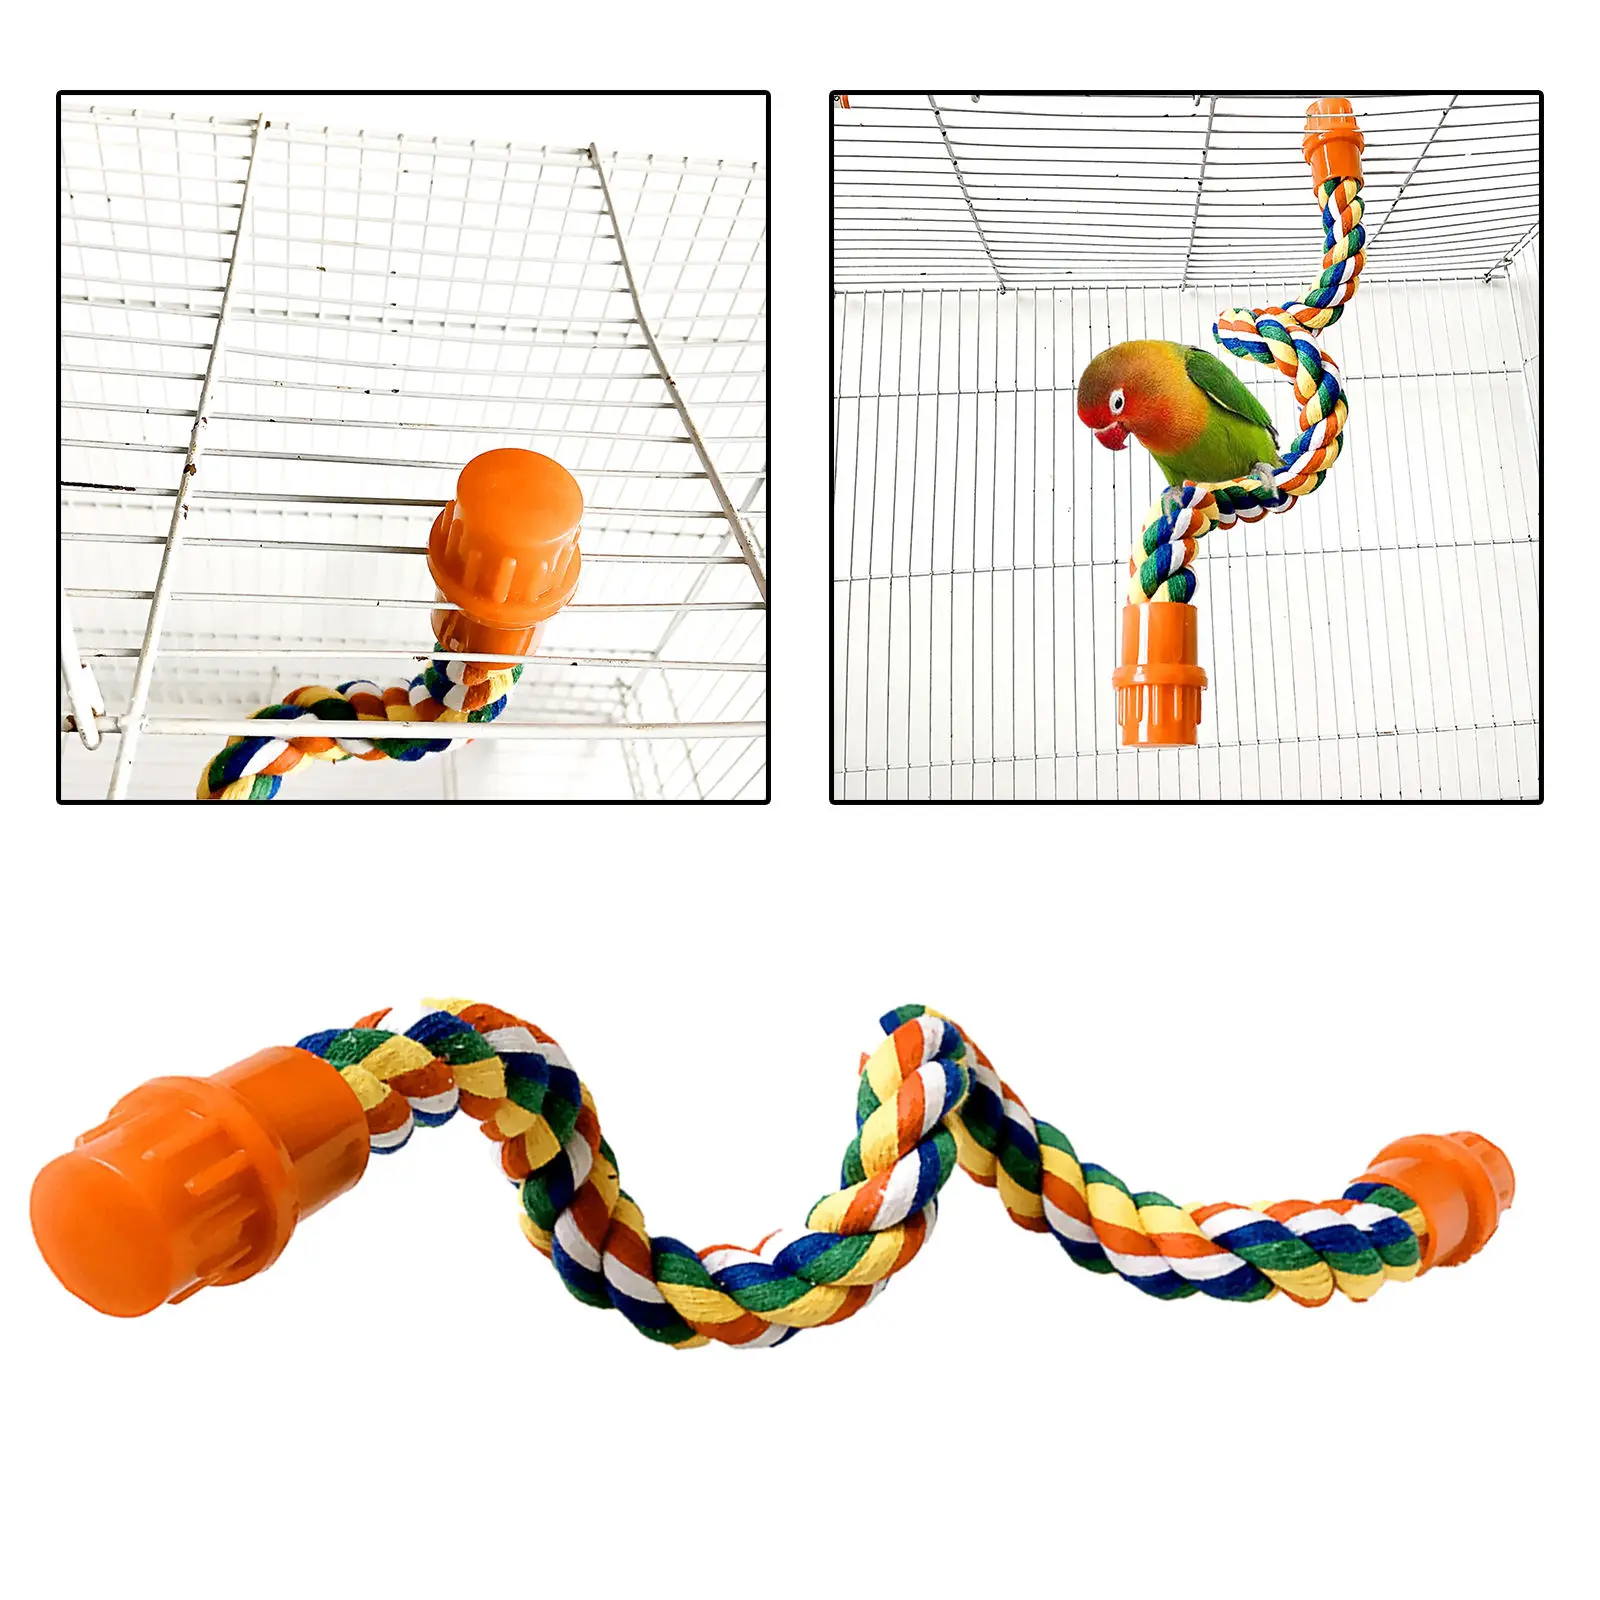 Colorful Flexible Bird Rope Perch Hanging Stand for Parrot Parakeet Conure Finch Canary Cage Toy